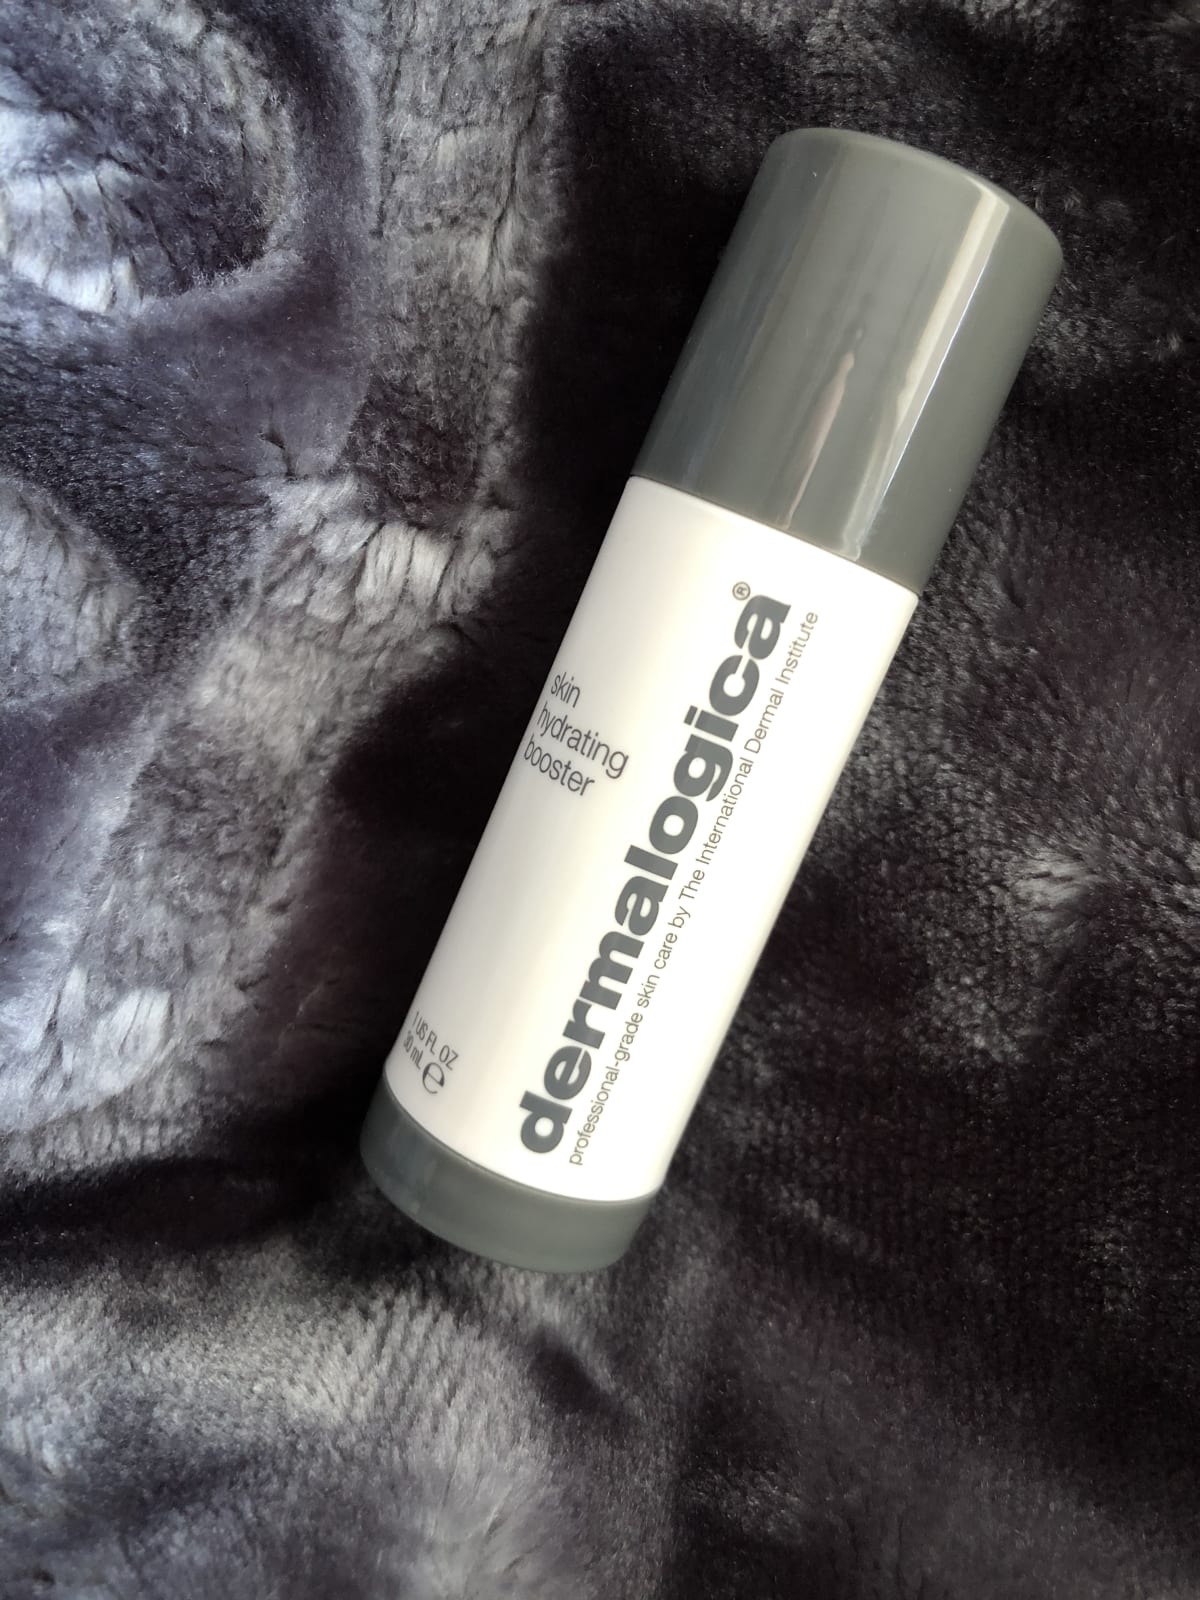 skin hydrating booster - review image